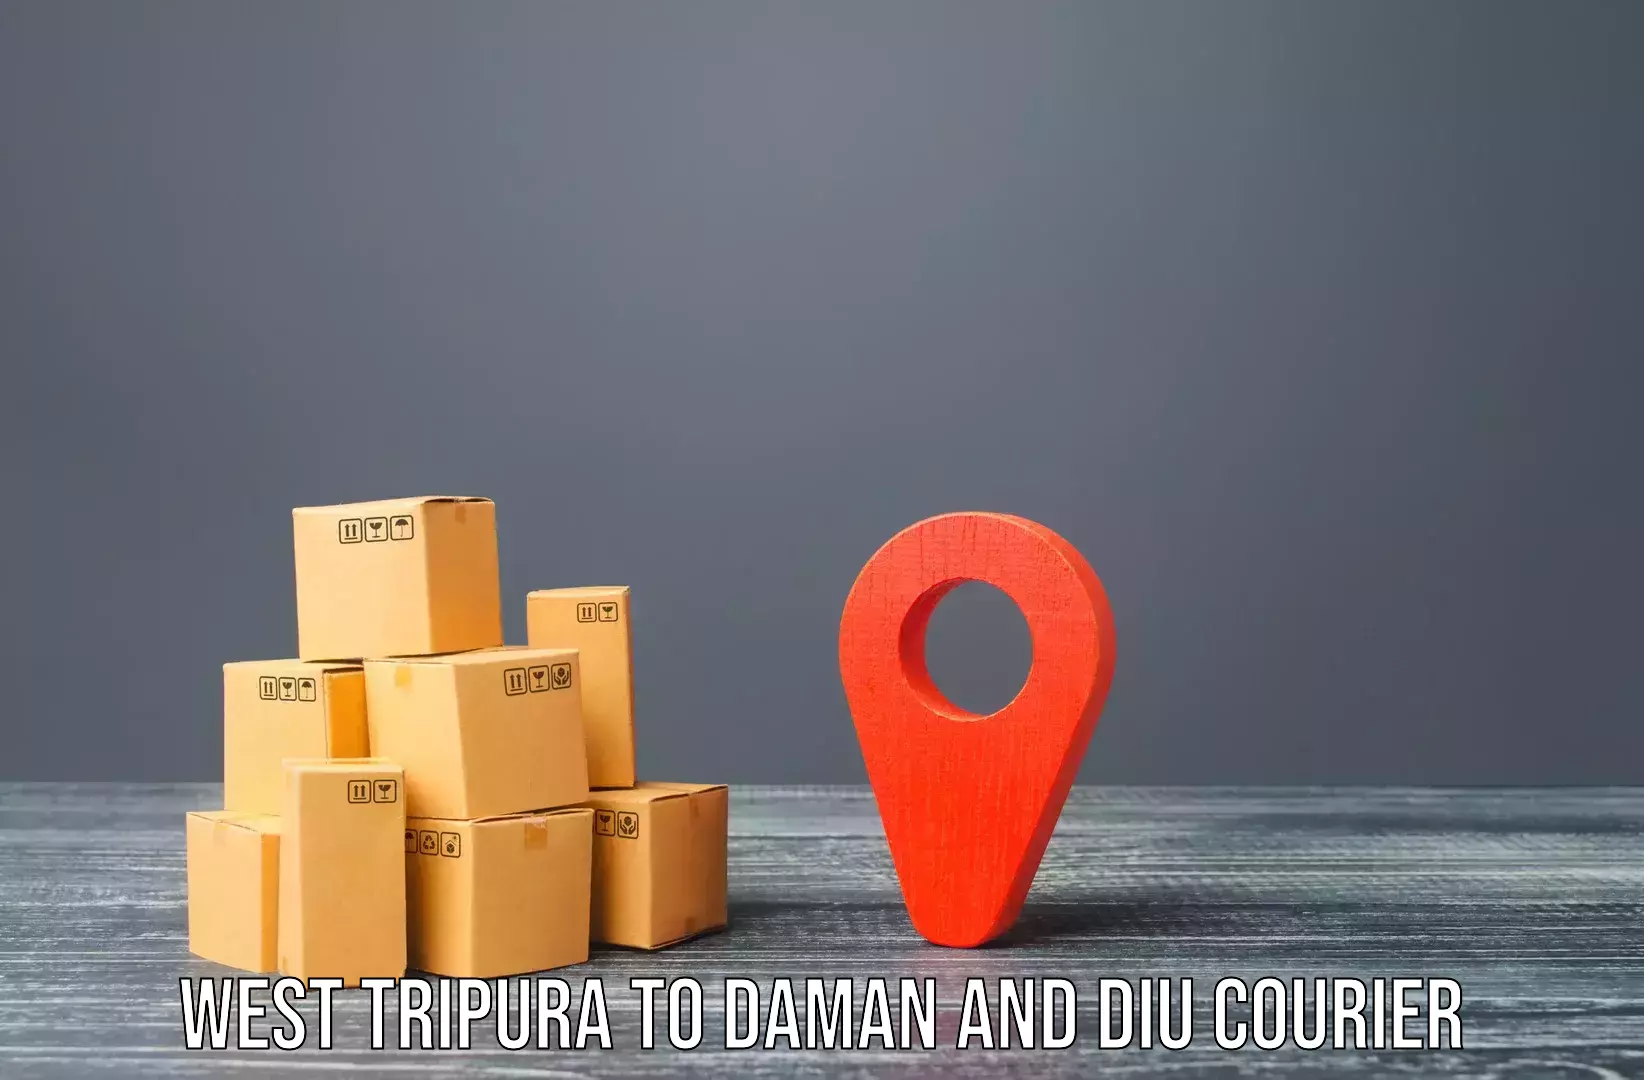 Professional packing services West Tripura to Daman